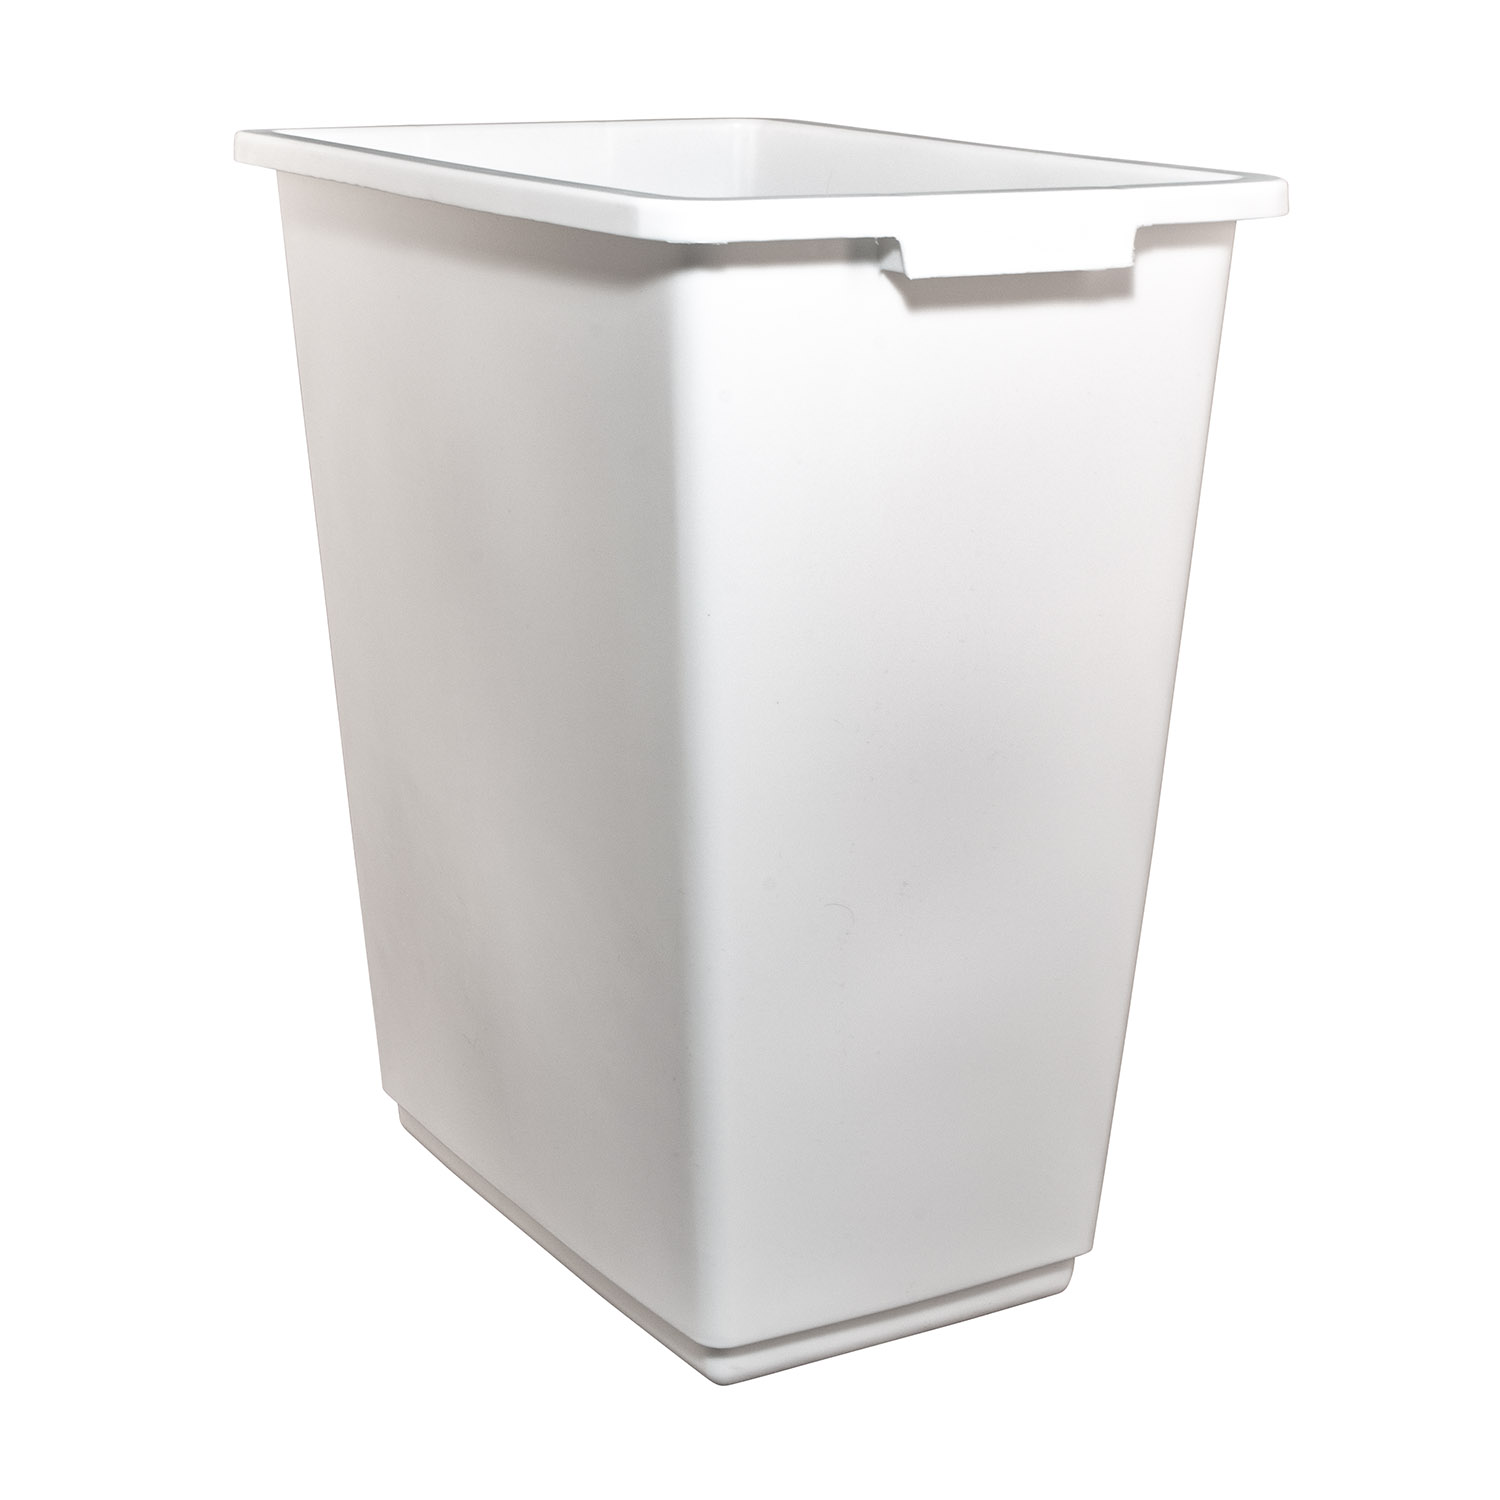 Webster Handi Bag Wastebasket Bags 8 gal 21.50 Width x 24 Length x 0.60 mil  15 Micron Thickness White Hexene Resin 780Carton 130 Per Box Home Office -  Office Depot